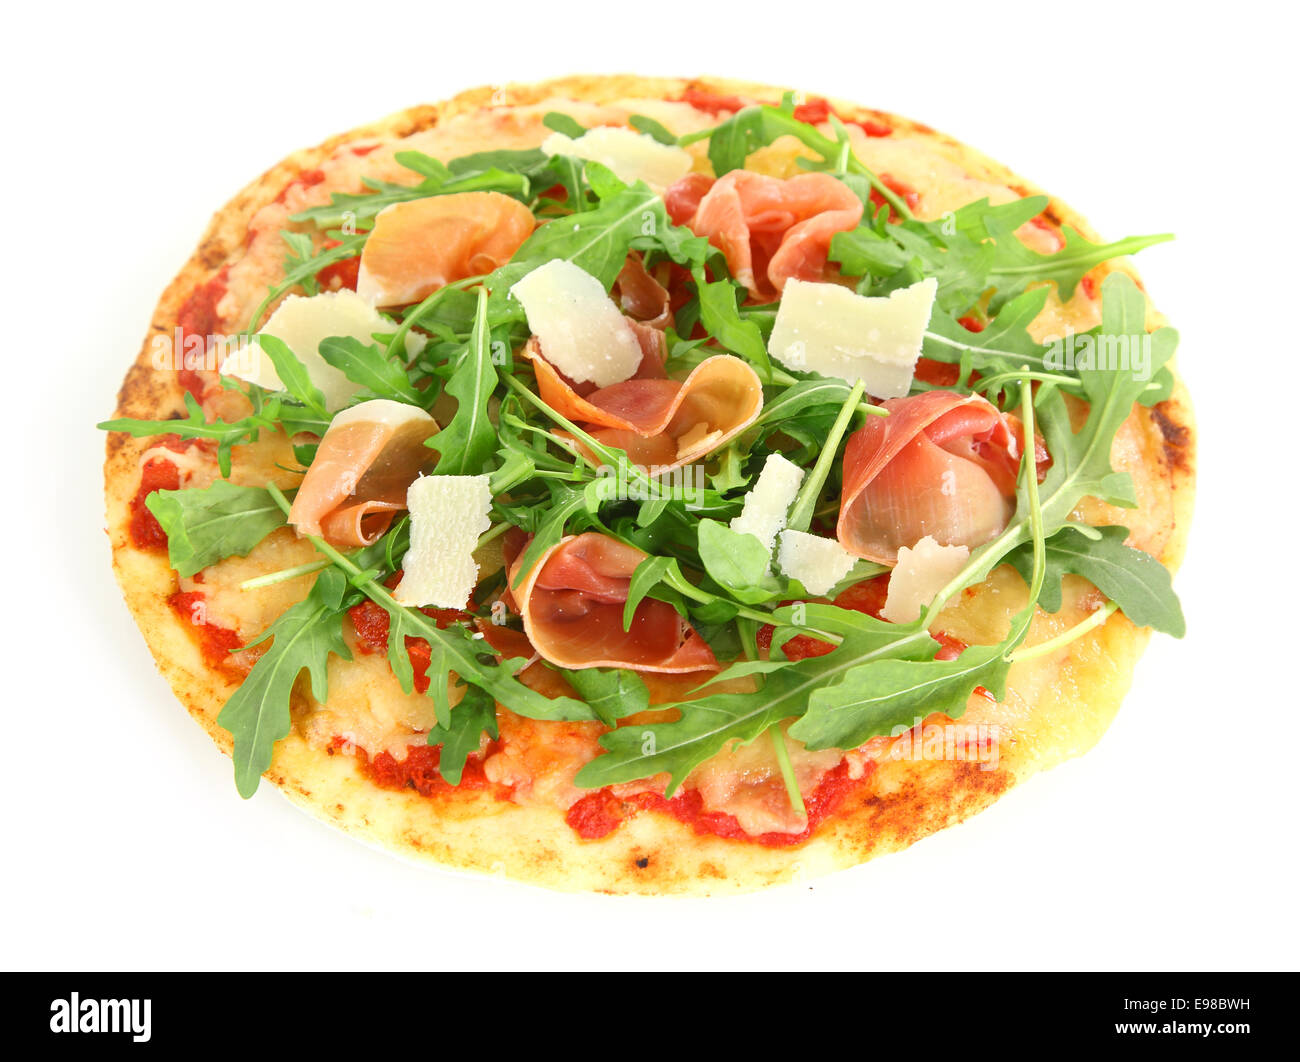 Close-up of a tasty nutritious pizza with Parma ham, rucola and cheese, on white background Stock Photo